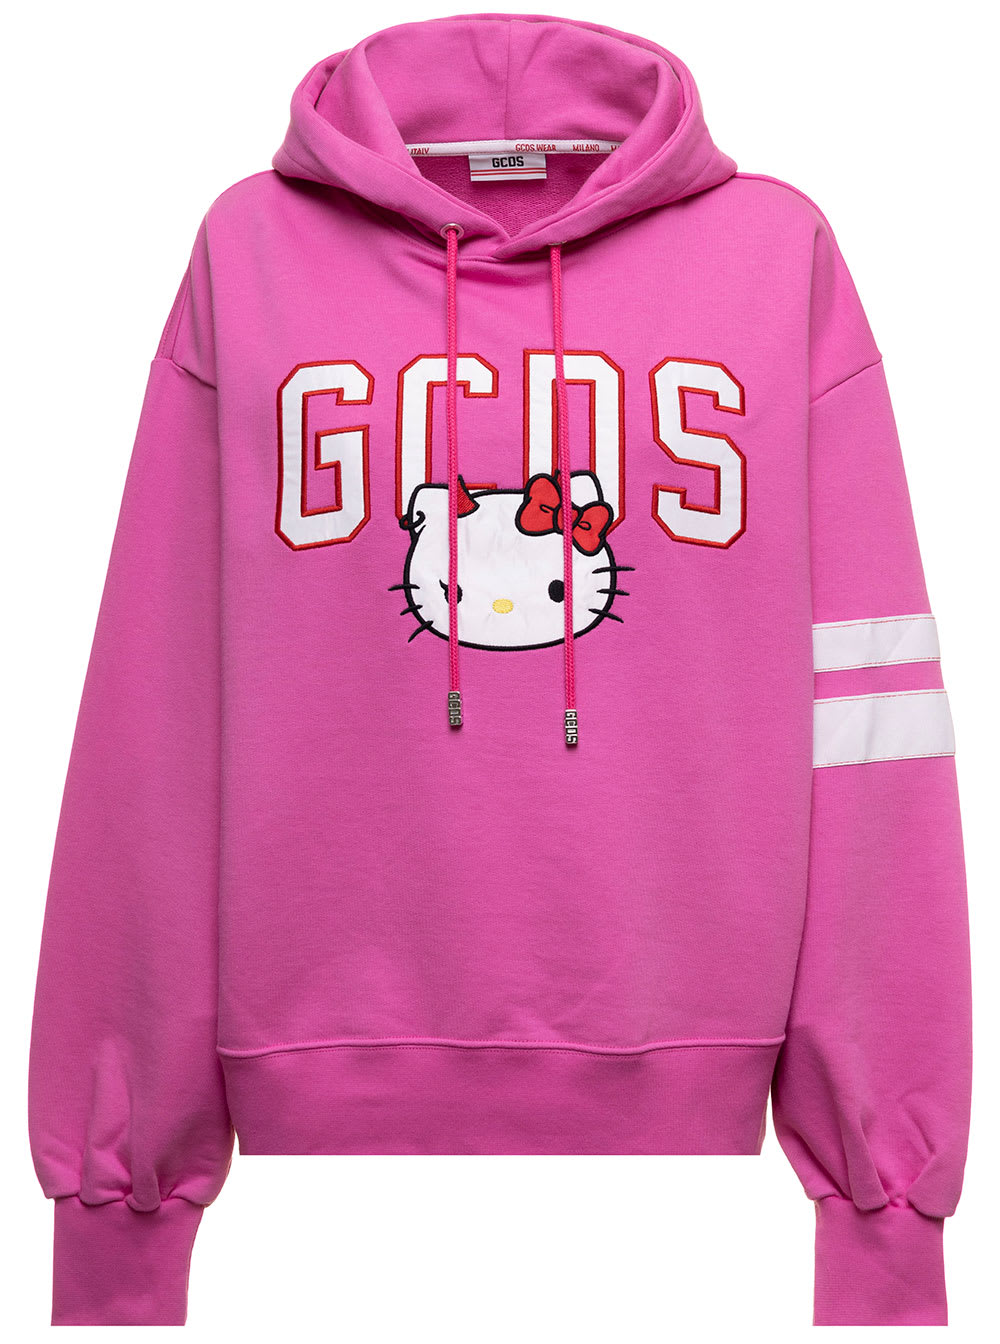 GCDS Pink Jersey Hoodiie In Fleece Cotton With Hello Kitty Print And Contrast Bands Woman